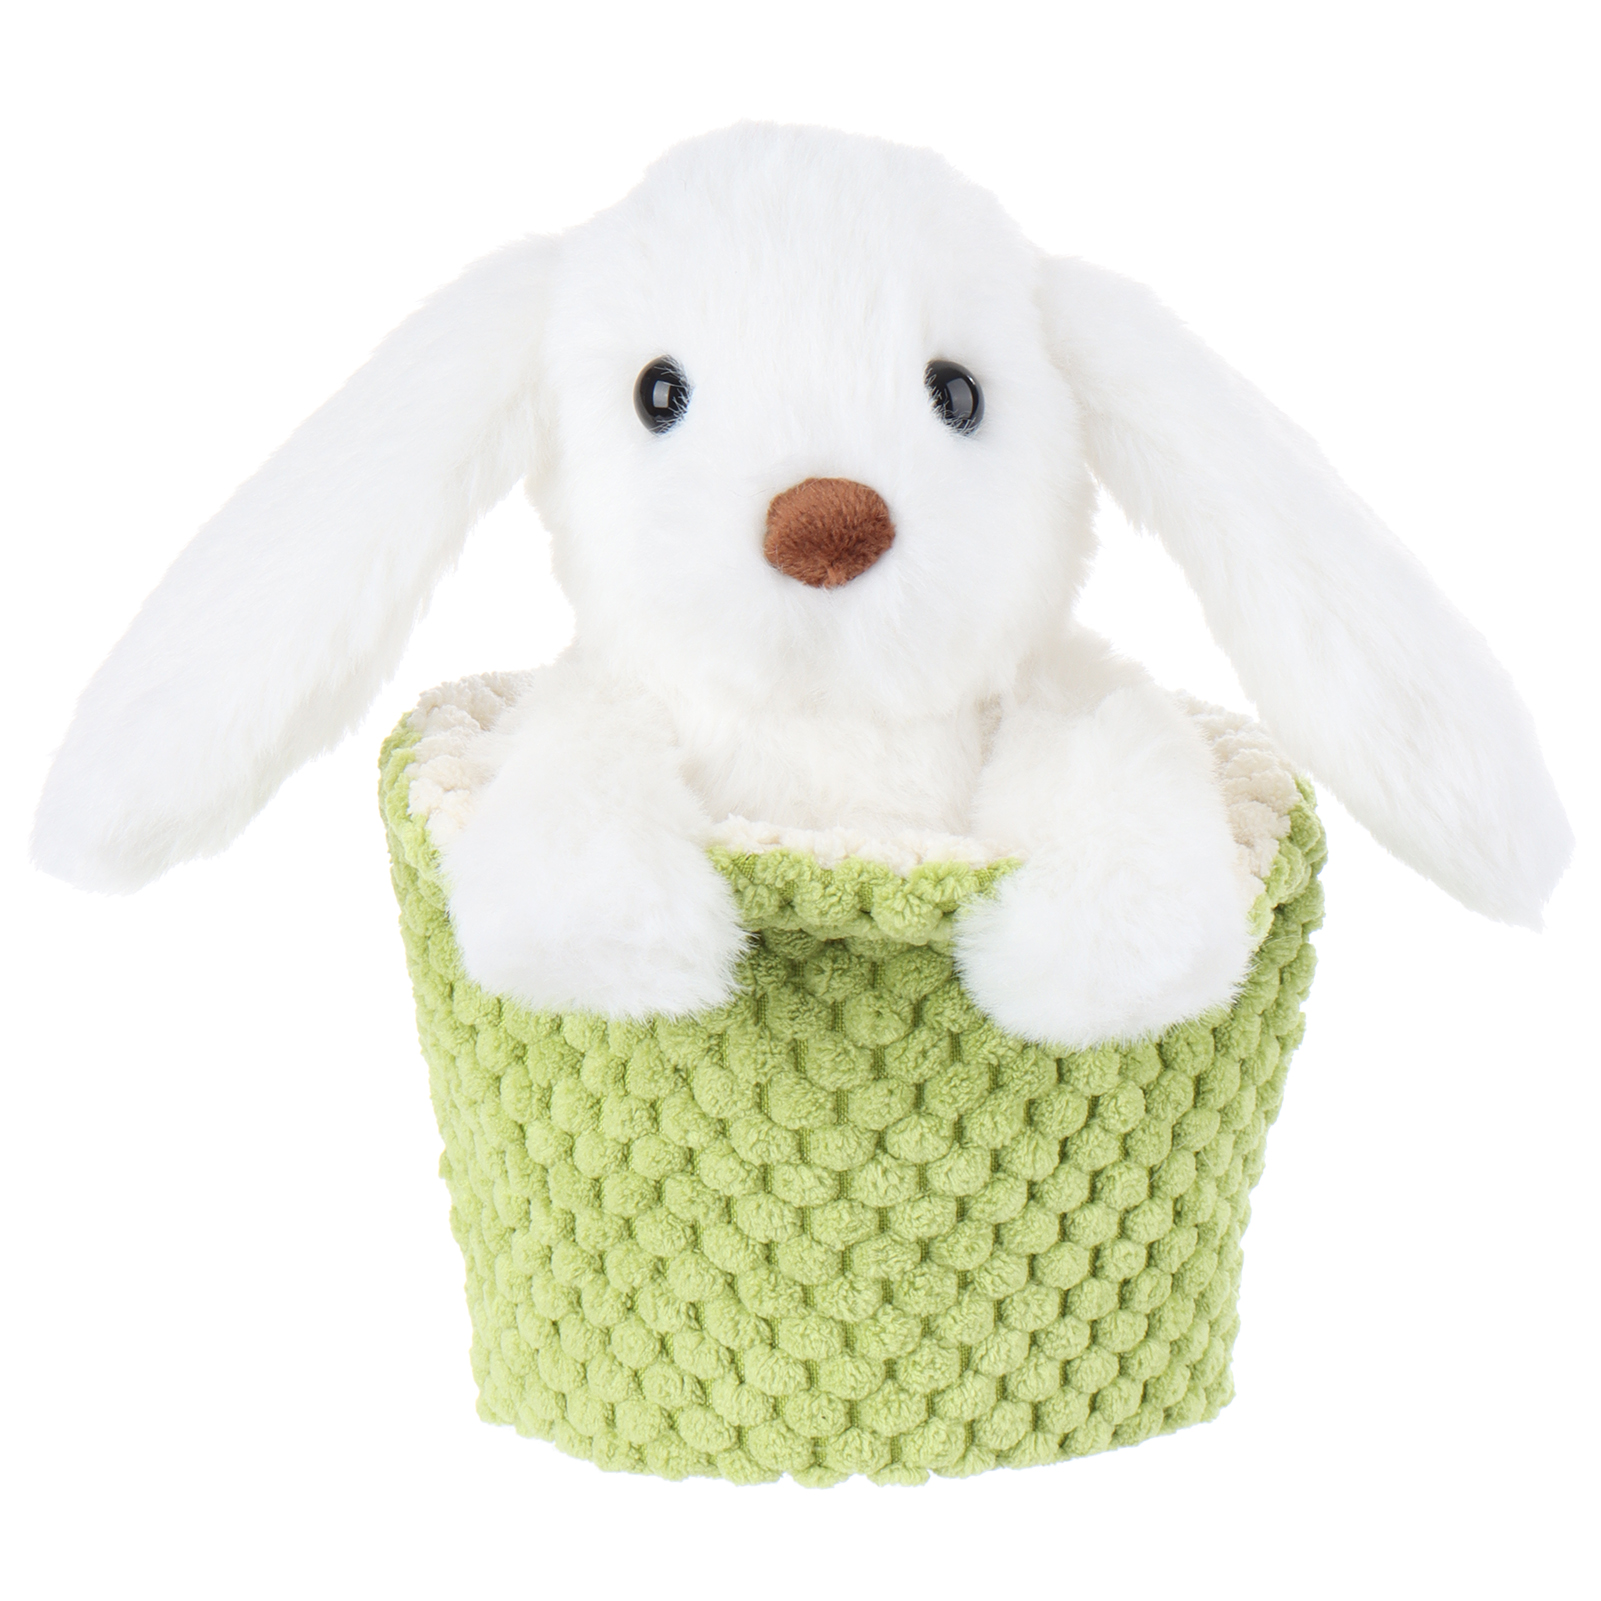 China Apricot Lamb Teacup Bunny-Green Stuffed Animal Soft Plush Toys  Manufacturer and Supplier